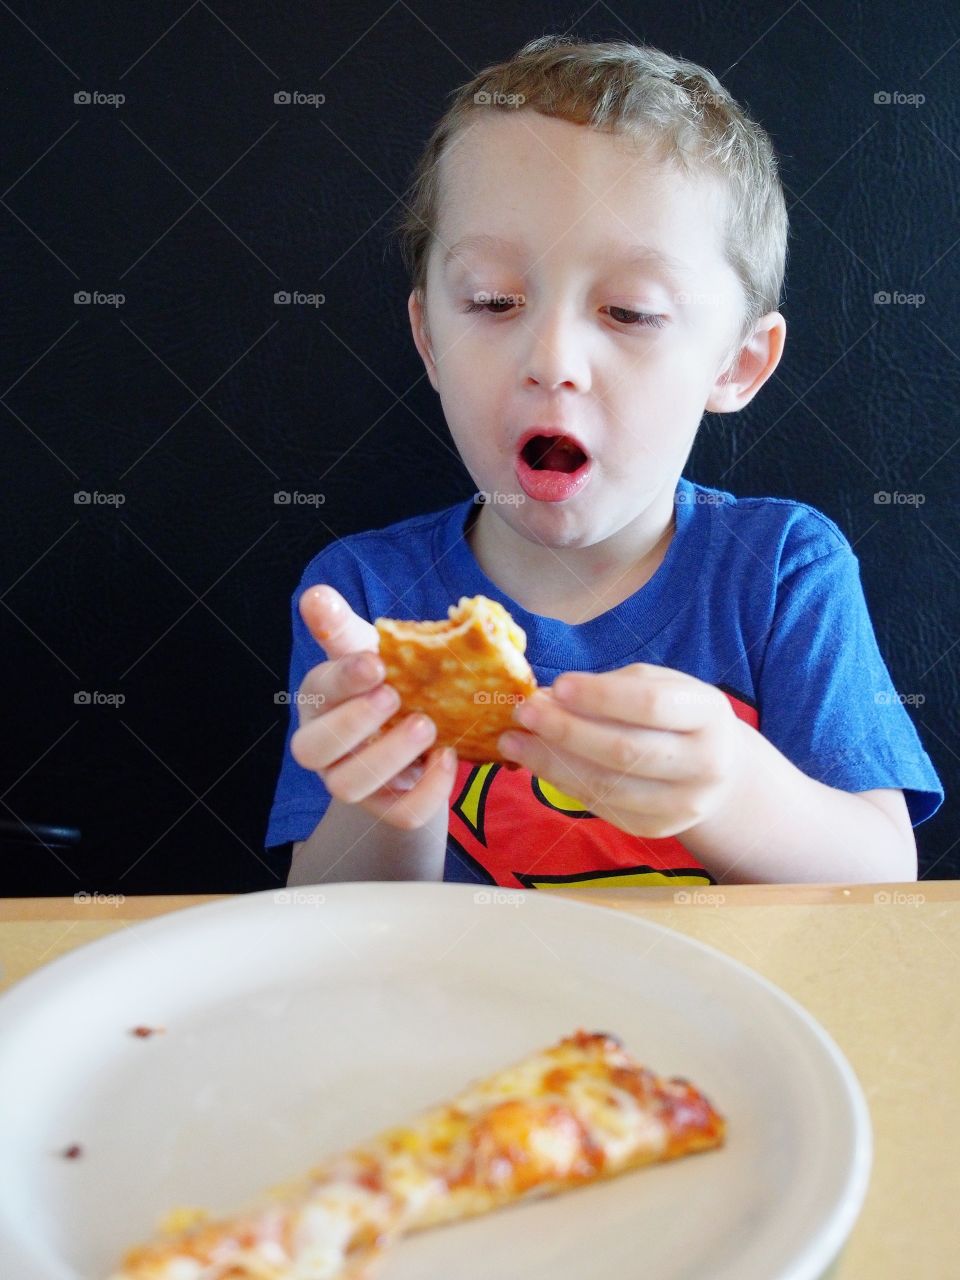 A little boy is shocked by his favorite food of pizza as it’s very hot fresh from the oven. 